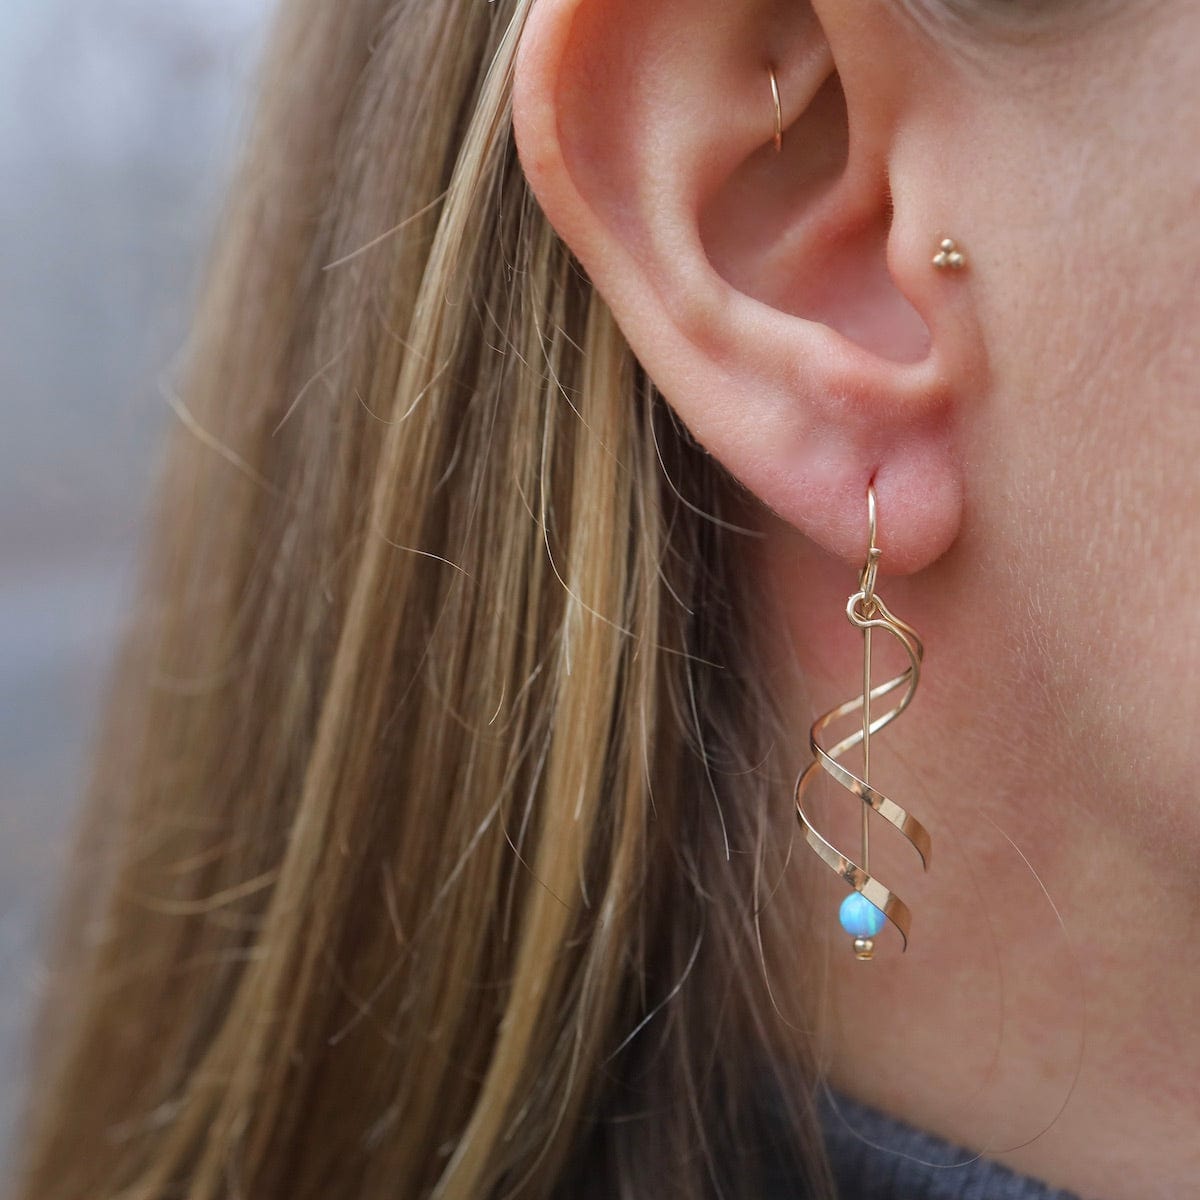 EAR-GF Double Spiral with Hanging Blue Opal Ball Earrings